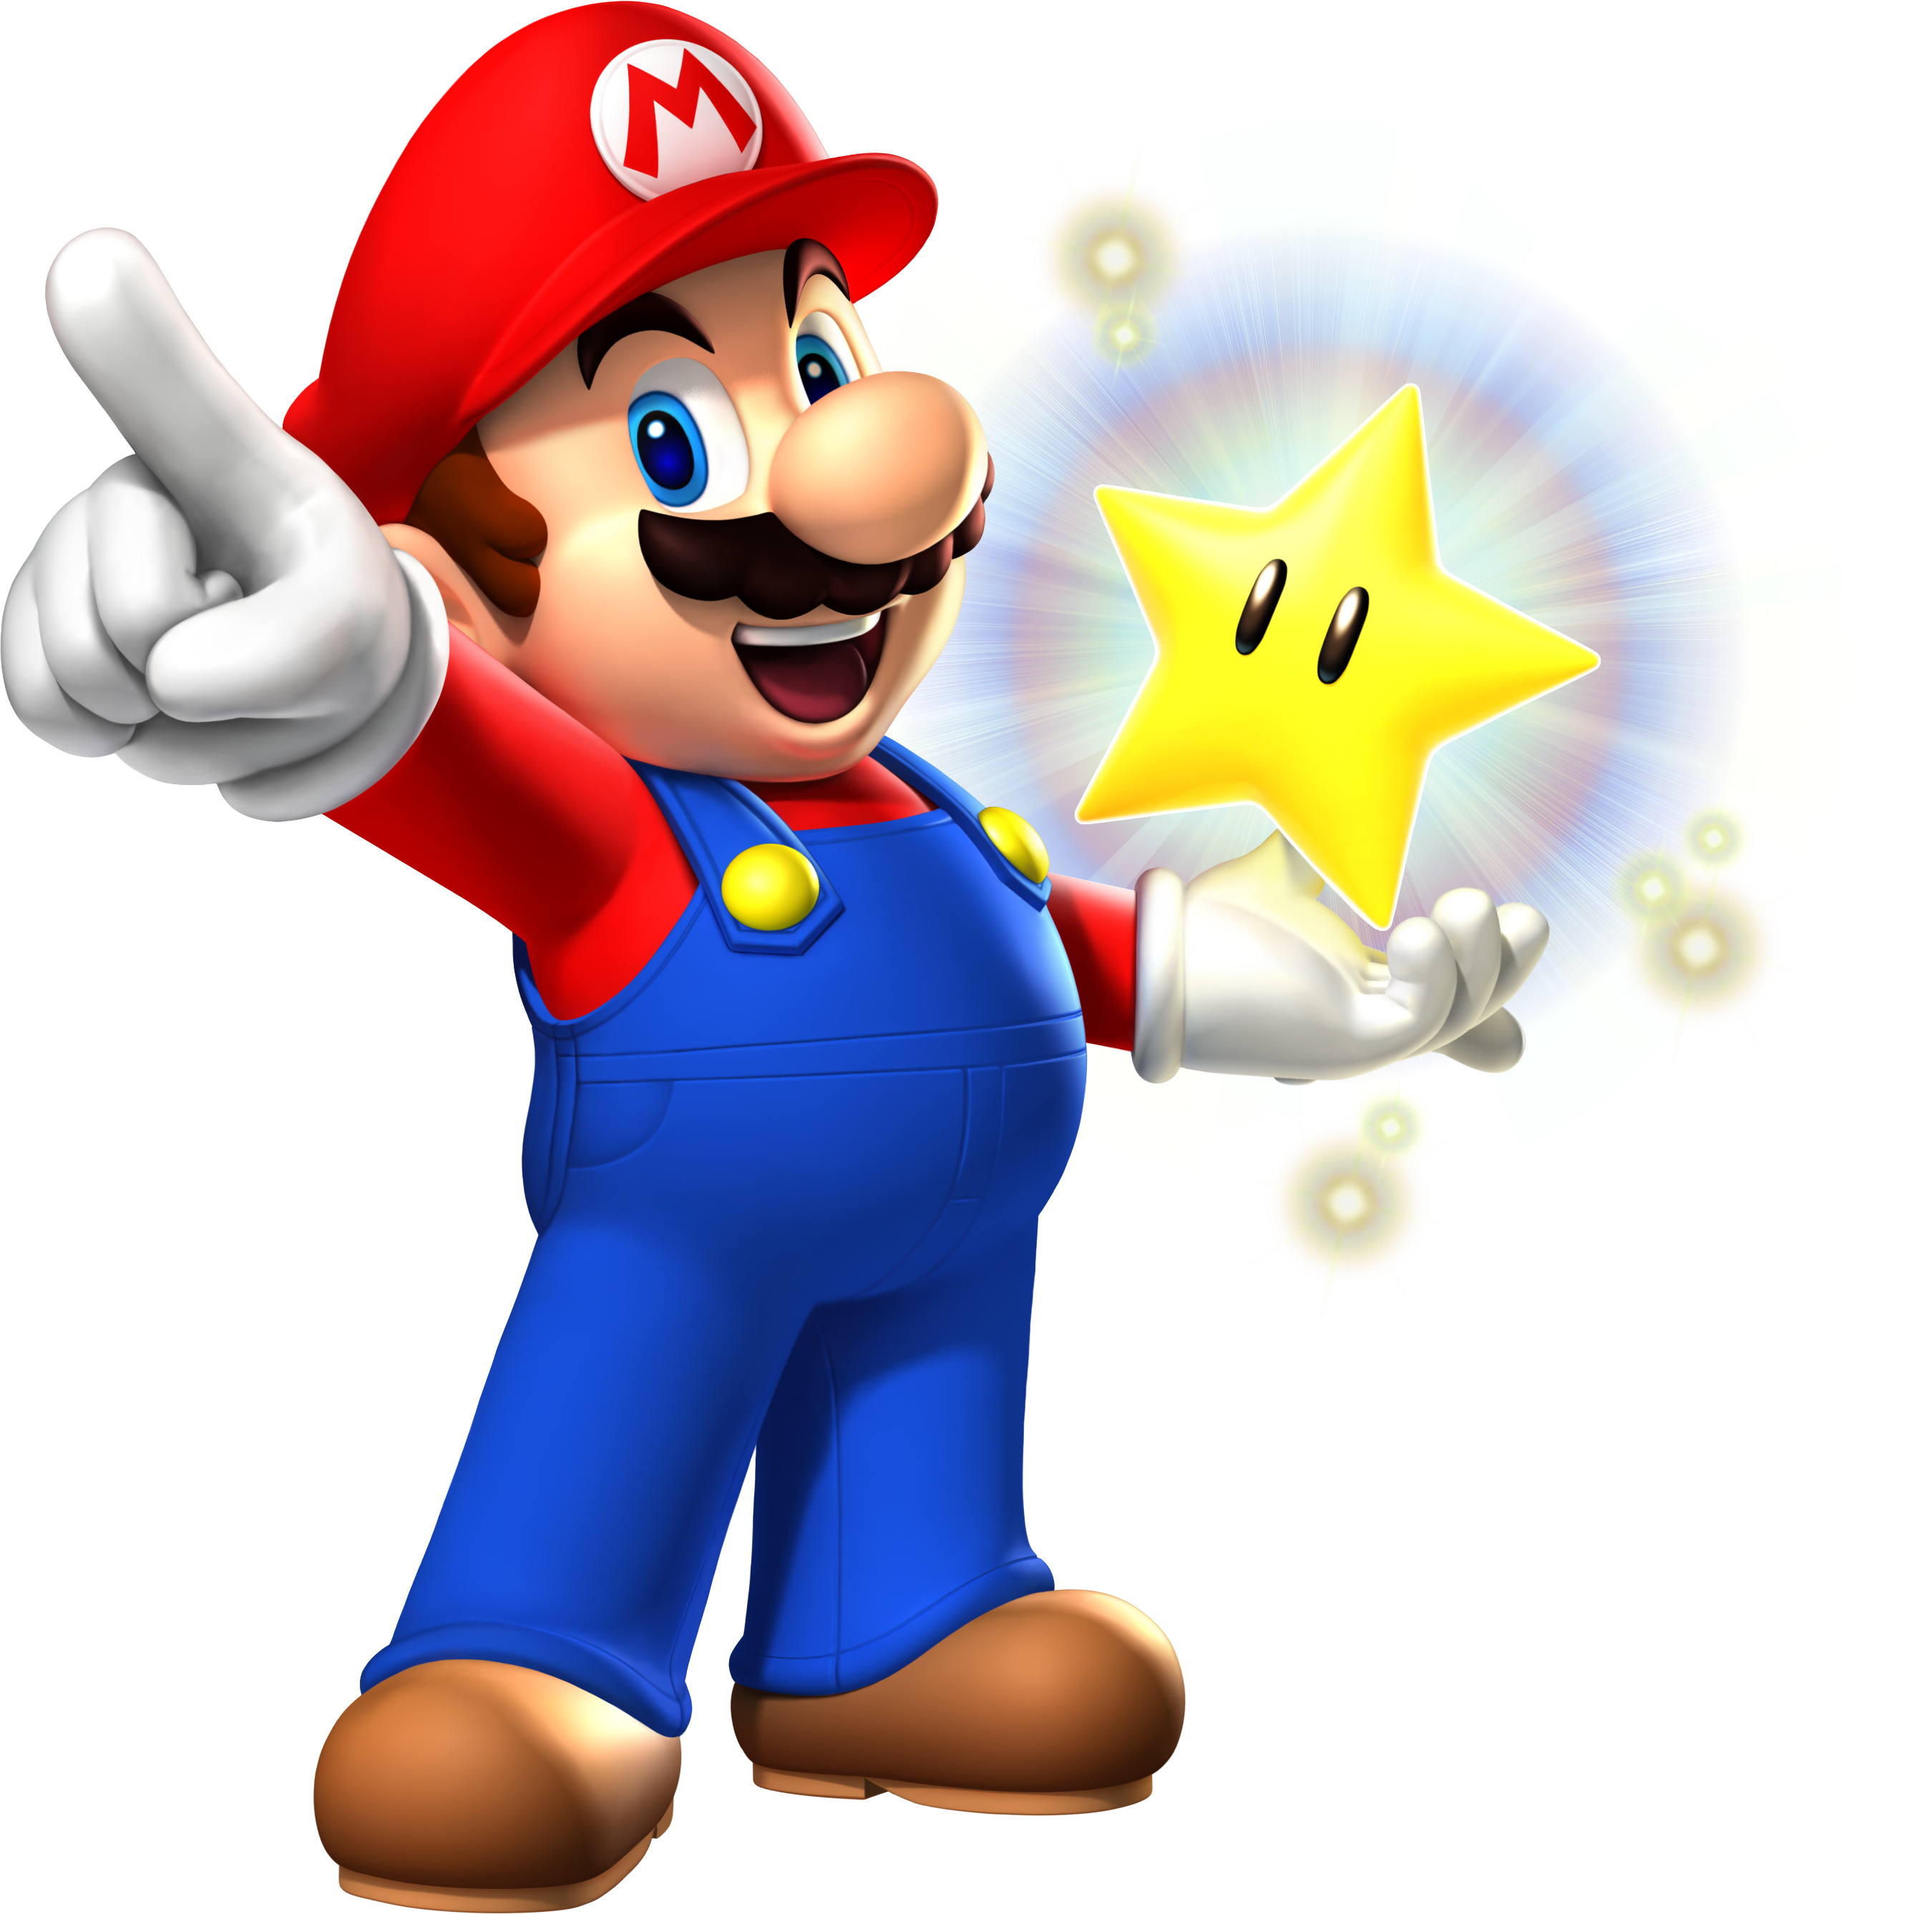 MP9_Mario_and_Glowing_Star_Artwork.png